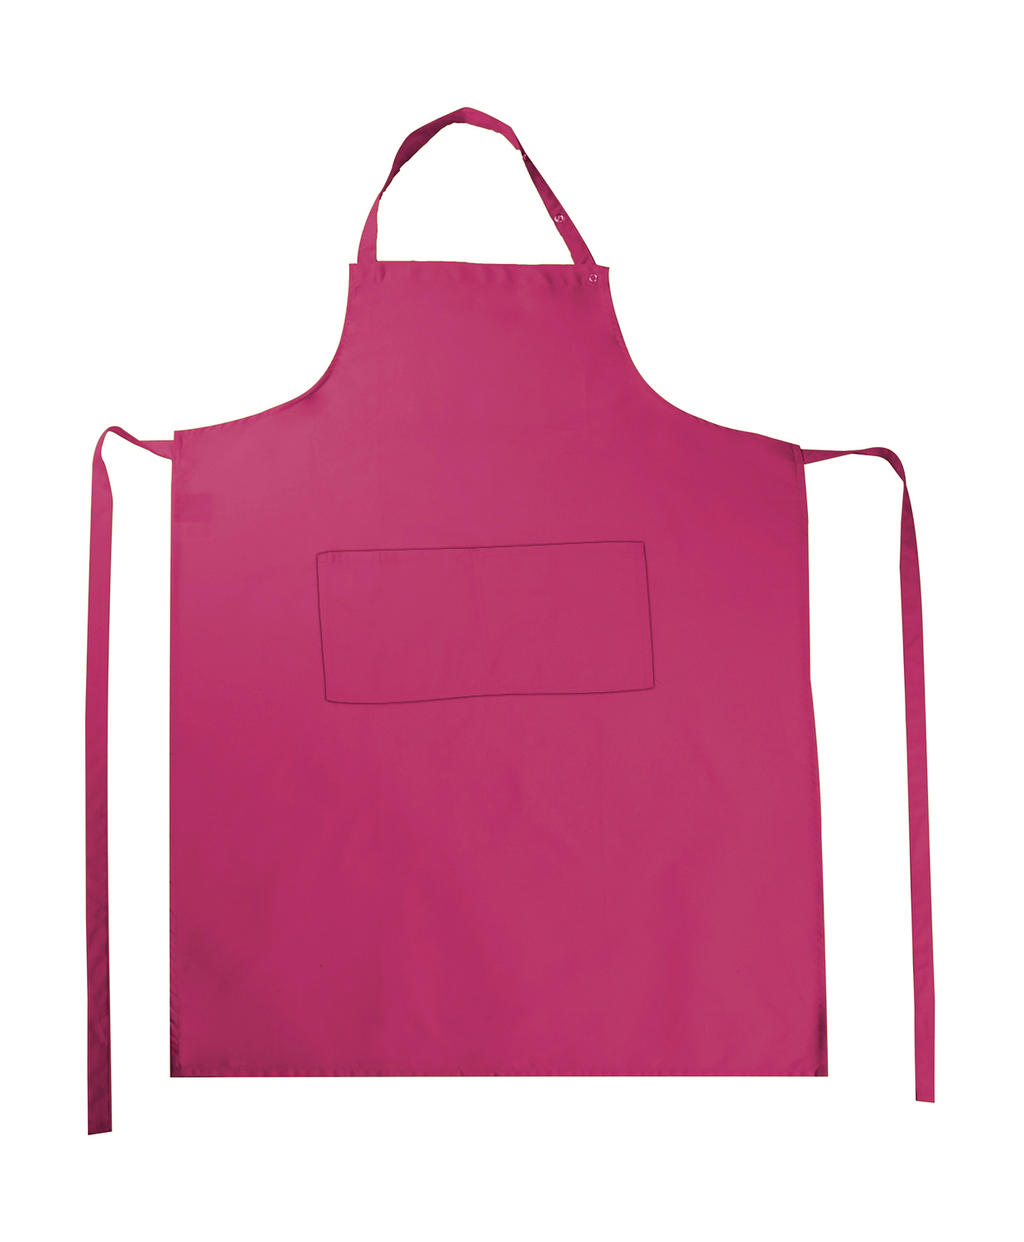  Amsterdam Bib Apron with Pocket in Farbe Pink